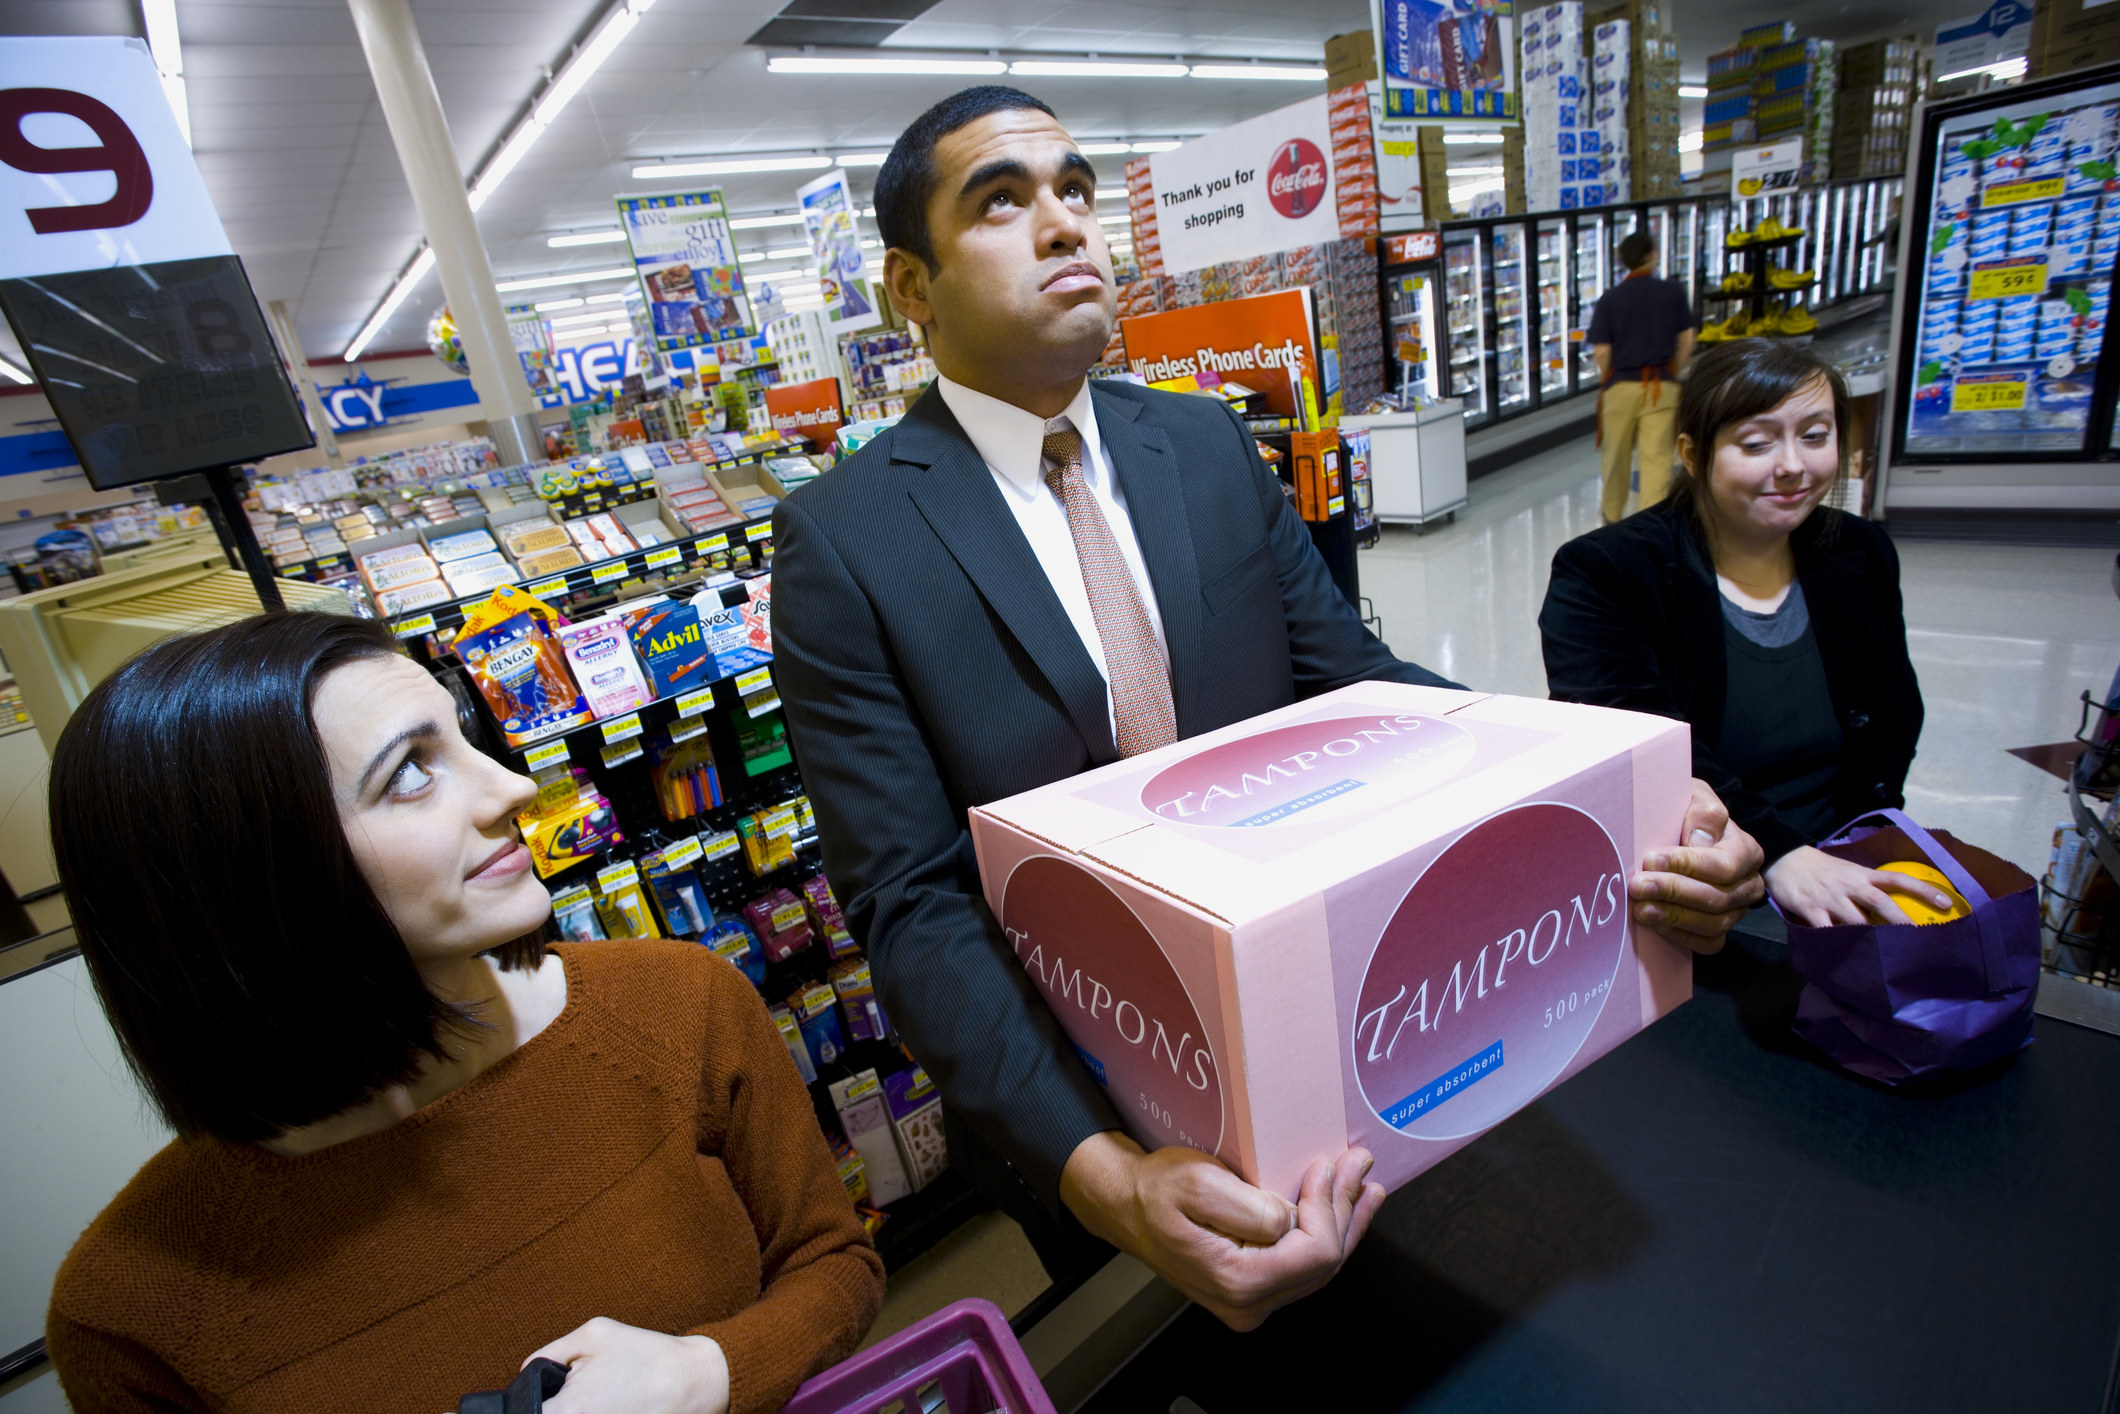 Man at the grocery checkout with a huge box of tampons